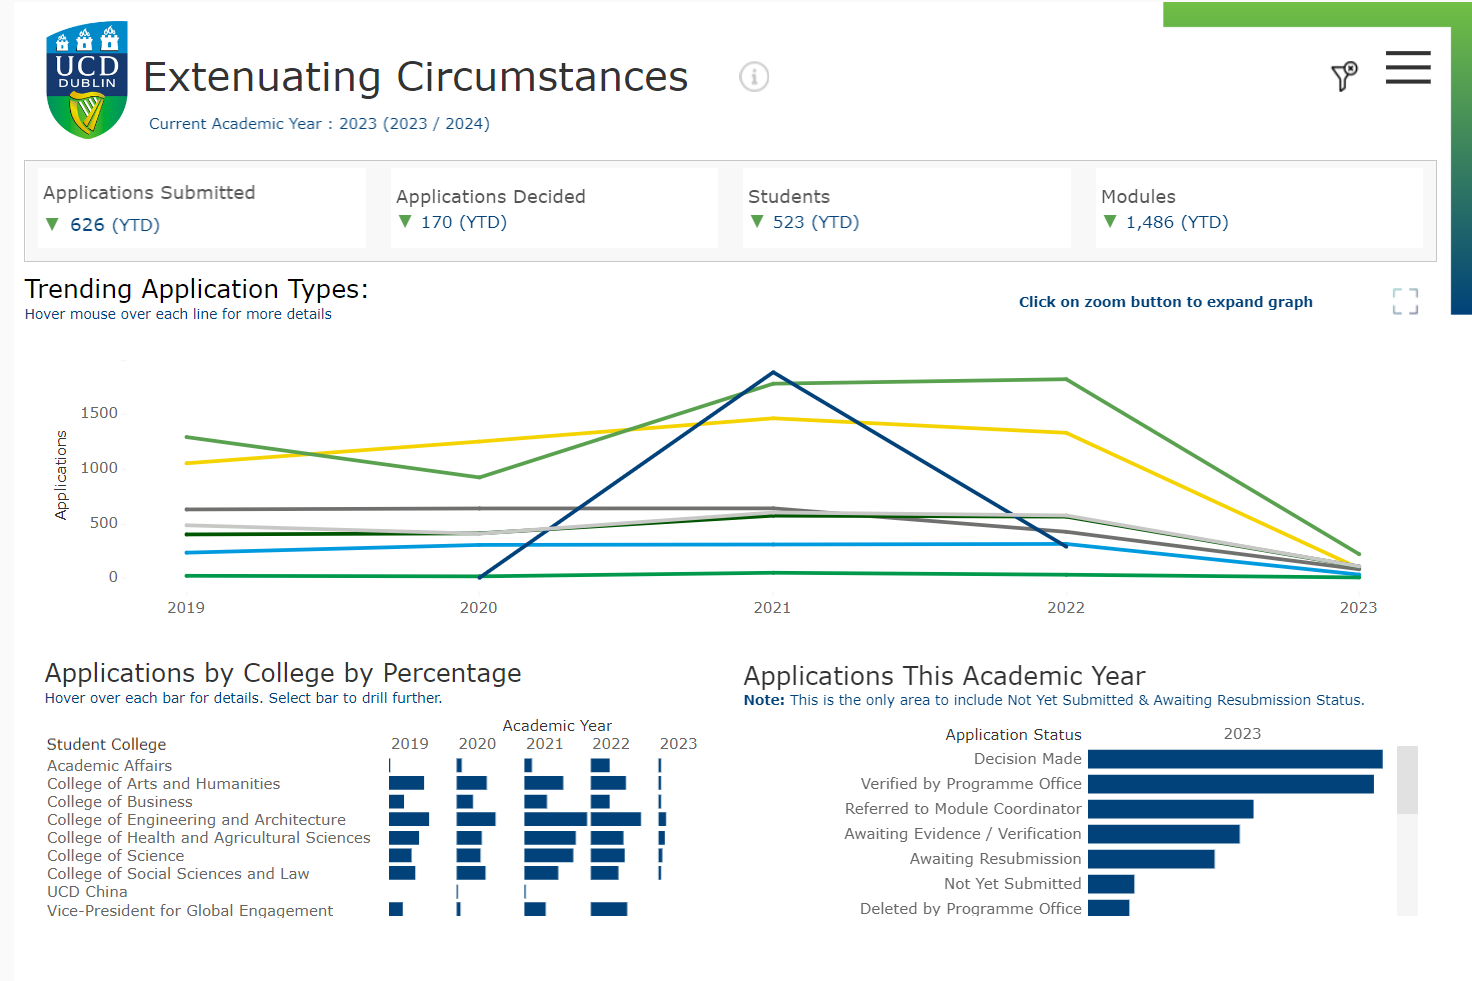 An image of the Extenuating Circumstances Tableau dashboard